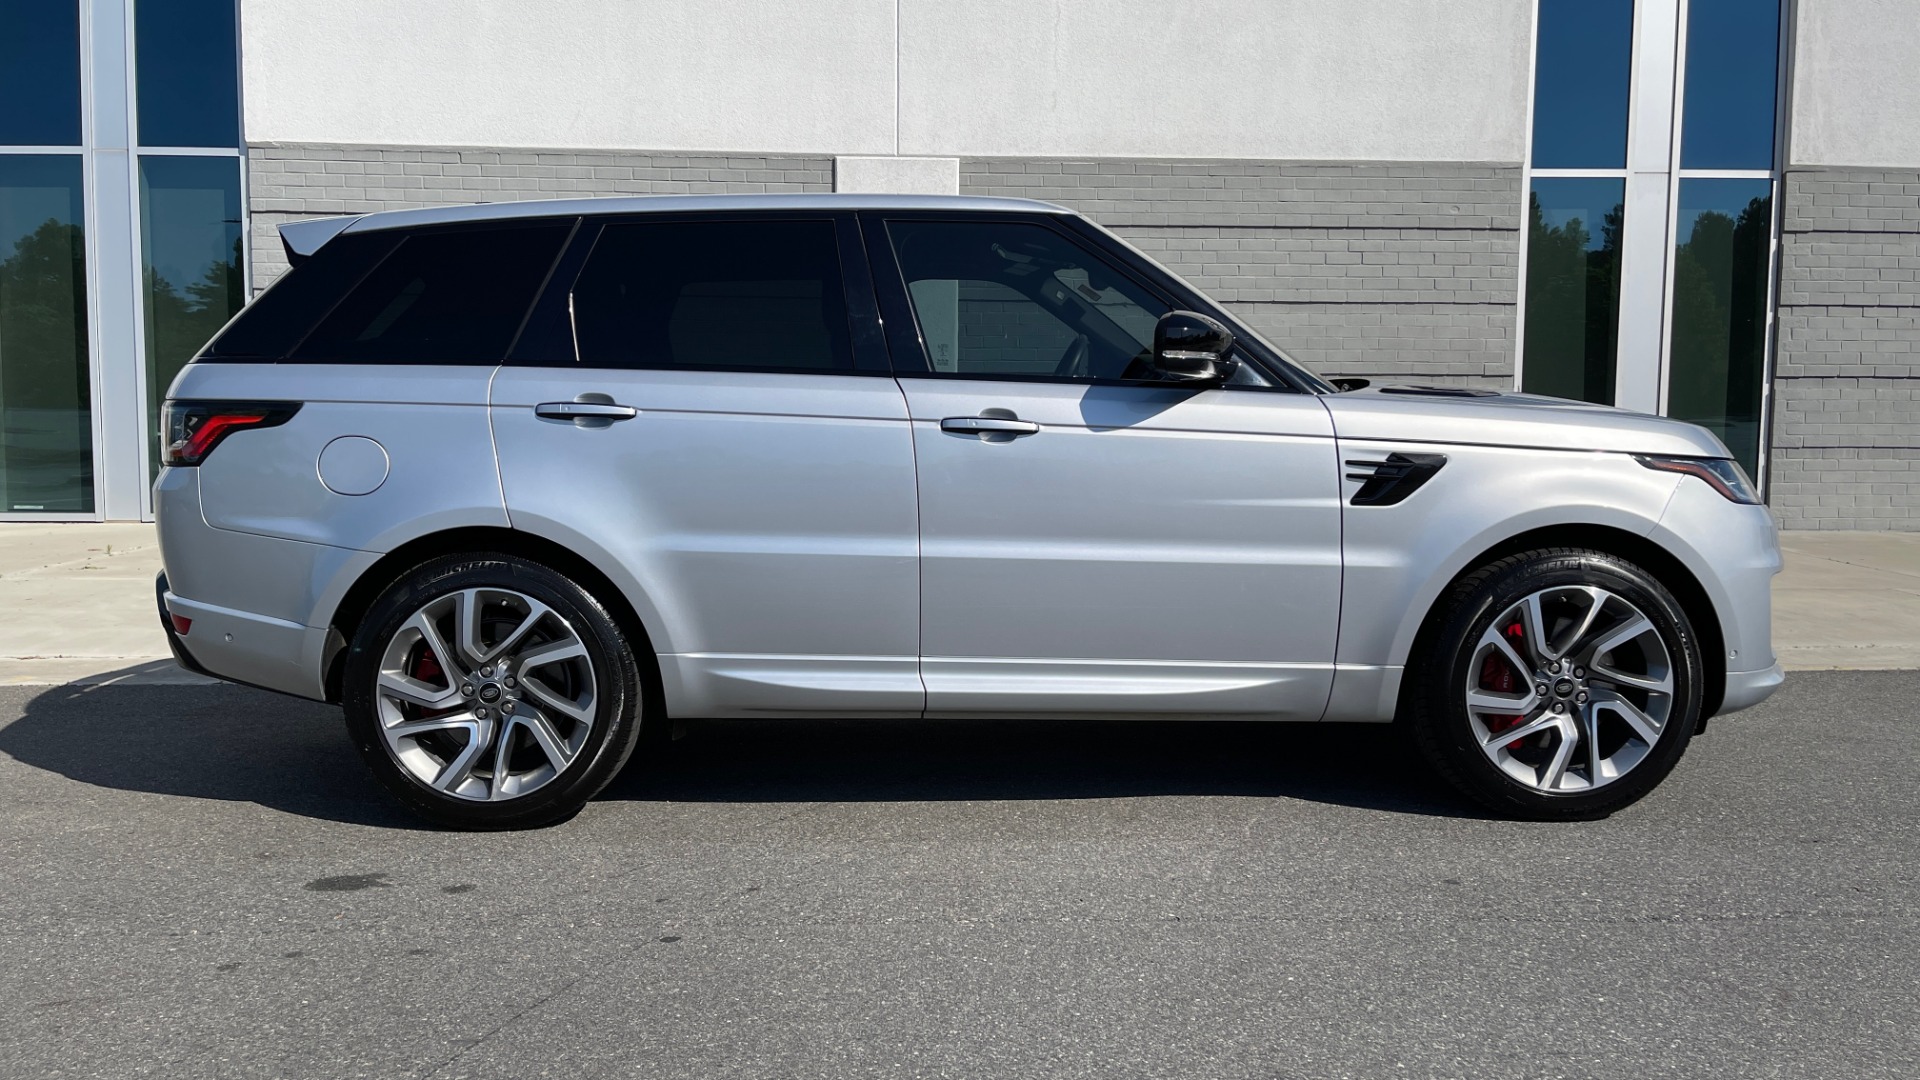 Used 2019 Land Rover RANGE ROVER SPORT HSE DYNAMIC / 3.0L SC V6 / 8-SPD / APPLE / NAV / SUNROOF / REARVIEW for sale Sold at Formula Imports in Charlotte NC 28227 5